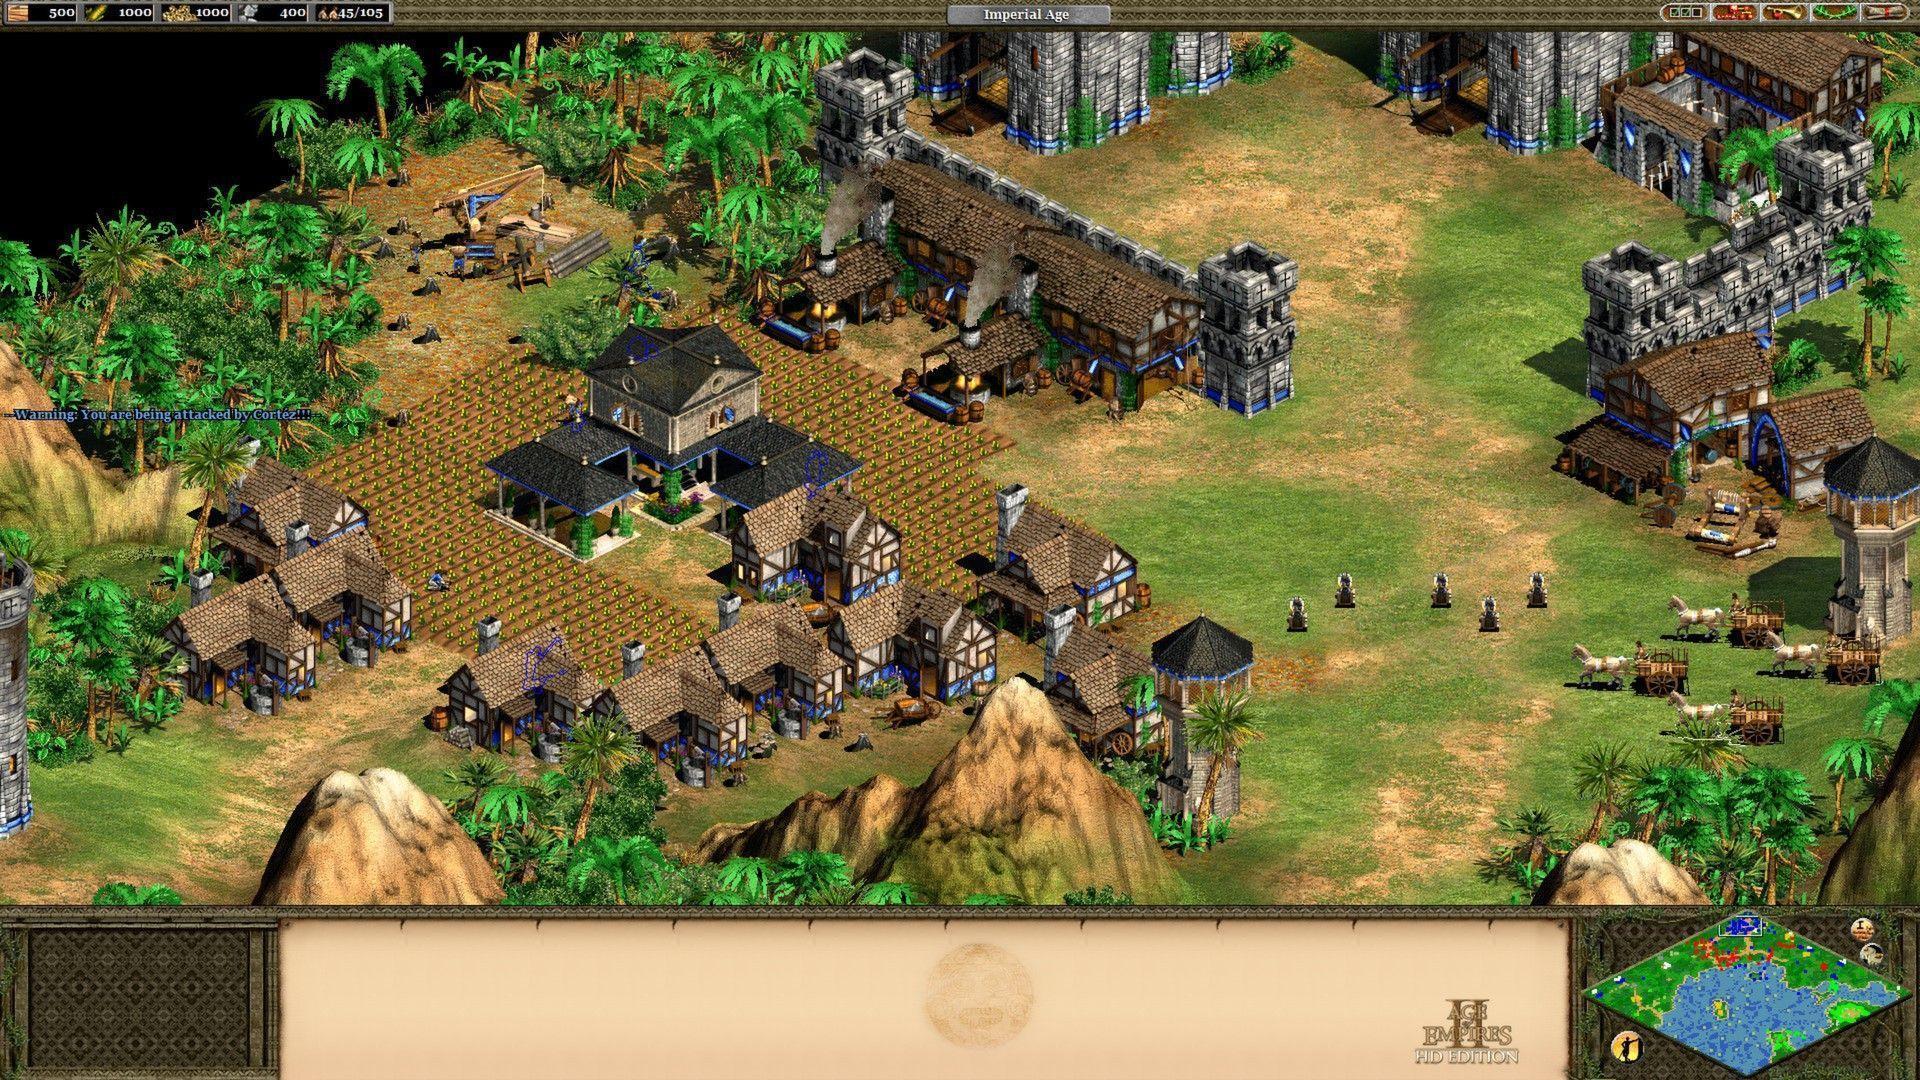 1920x1080px Age Of Empires 2 (930.68 KB).03.2015